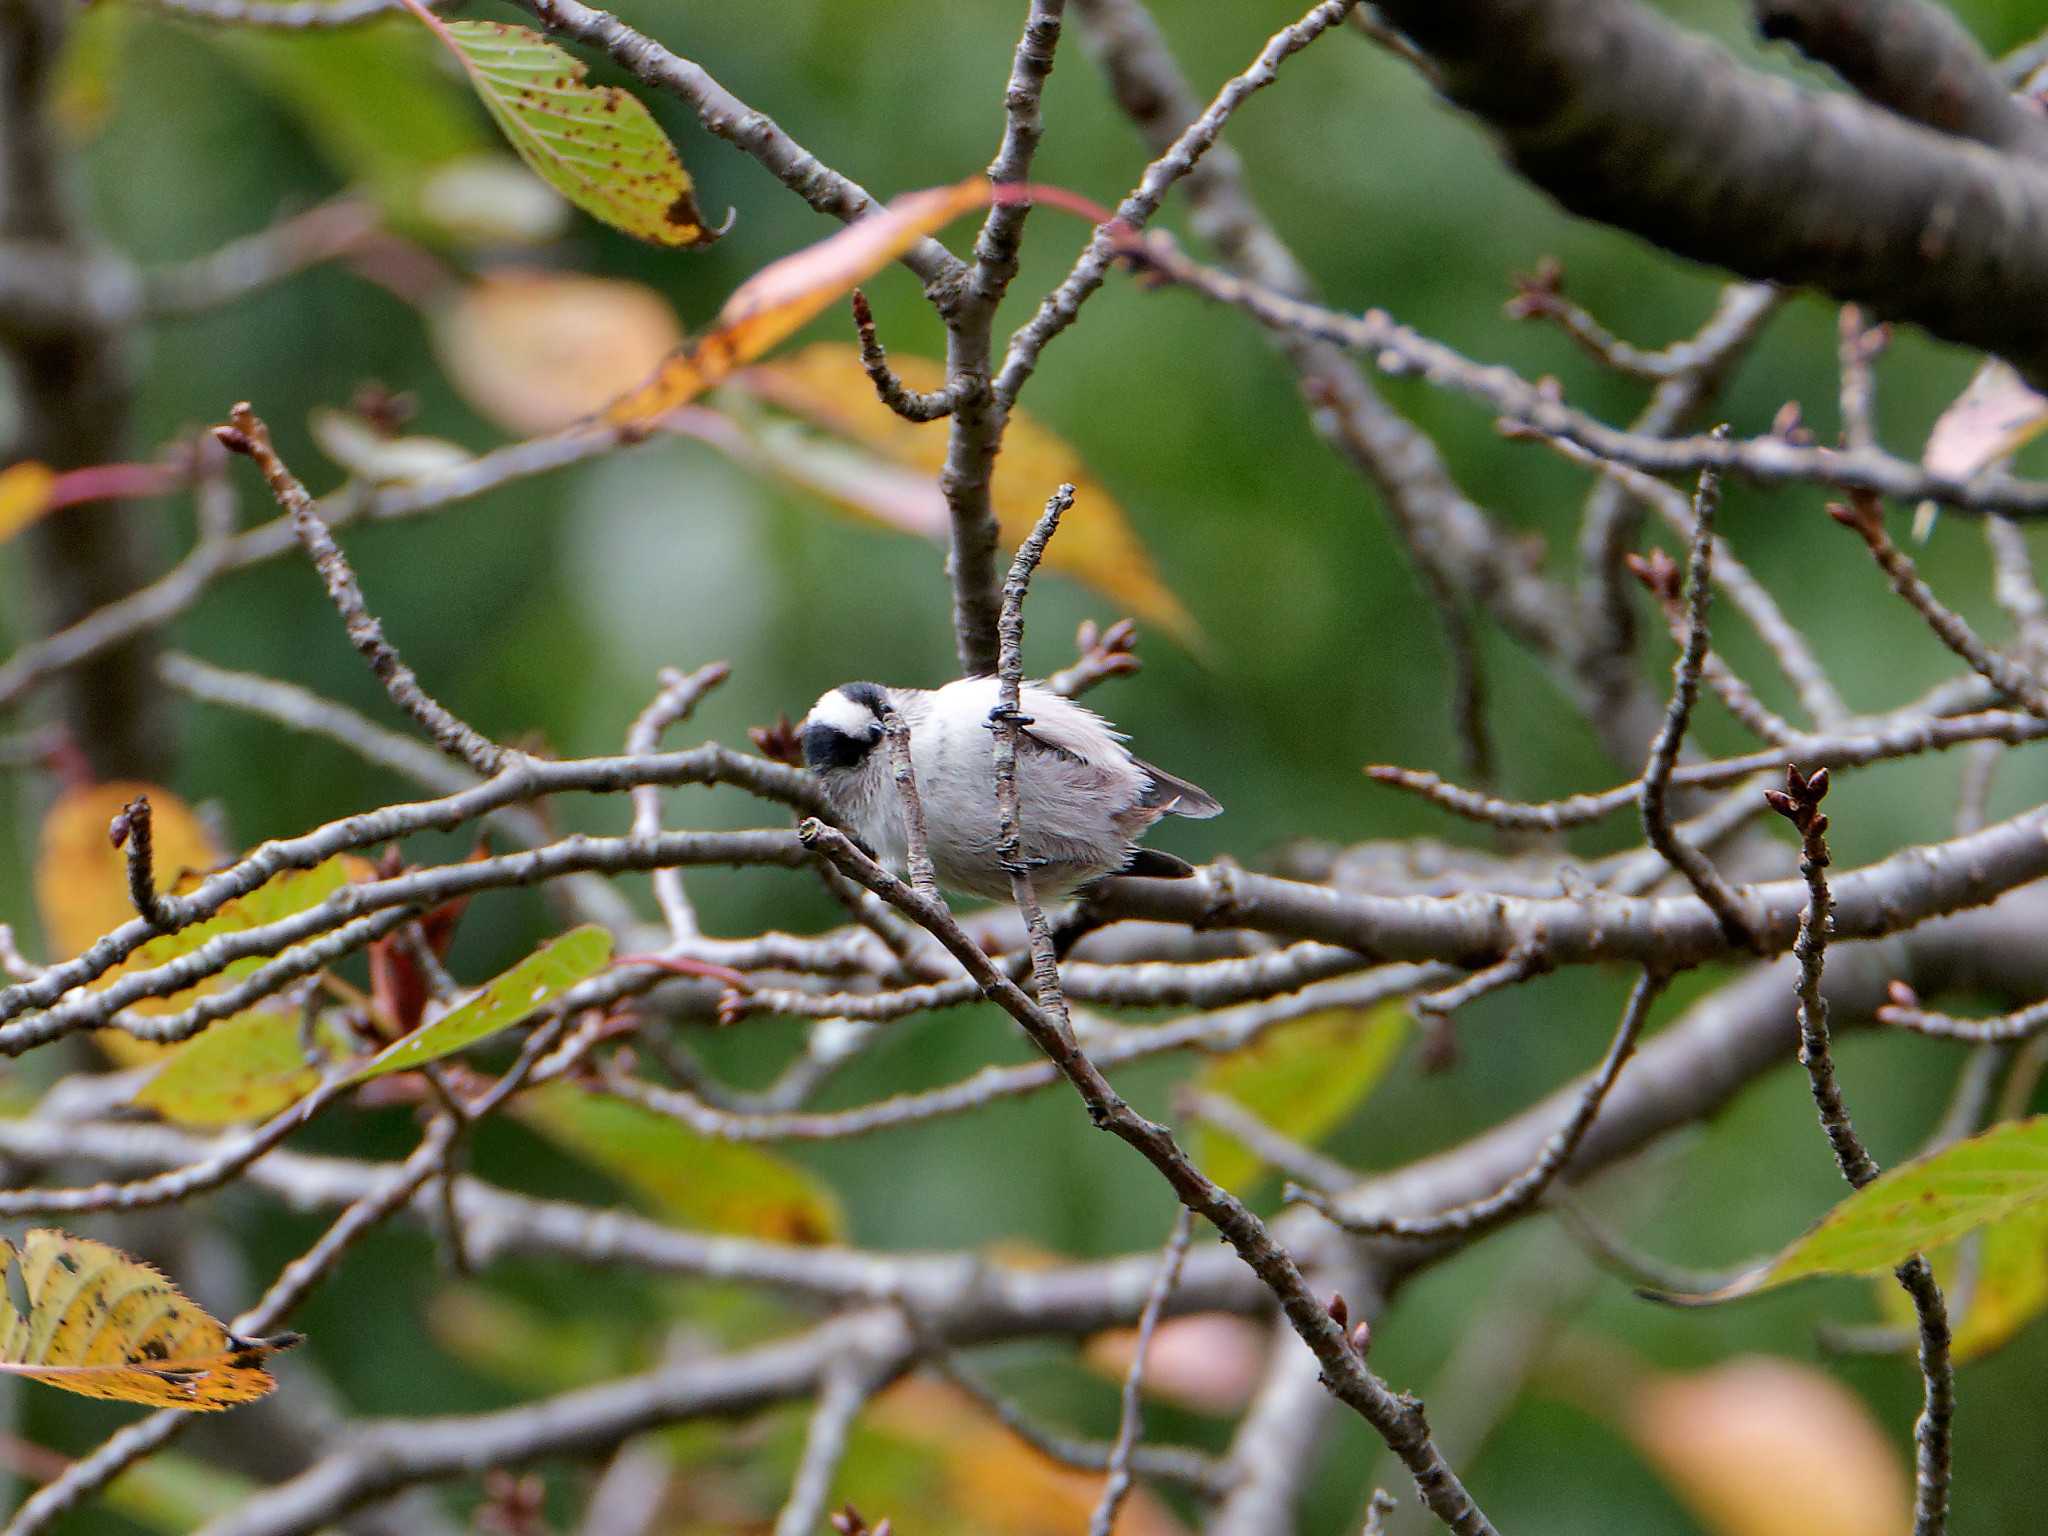 Photo of Long-tailed Tit at 横浜市立金沢自然公園 by しおまつ